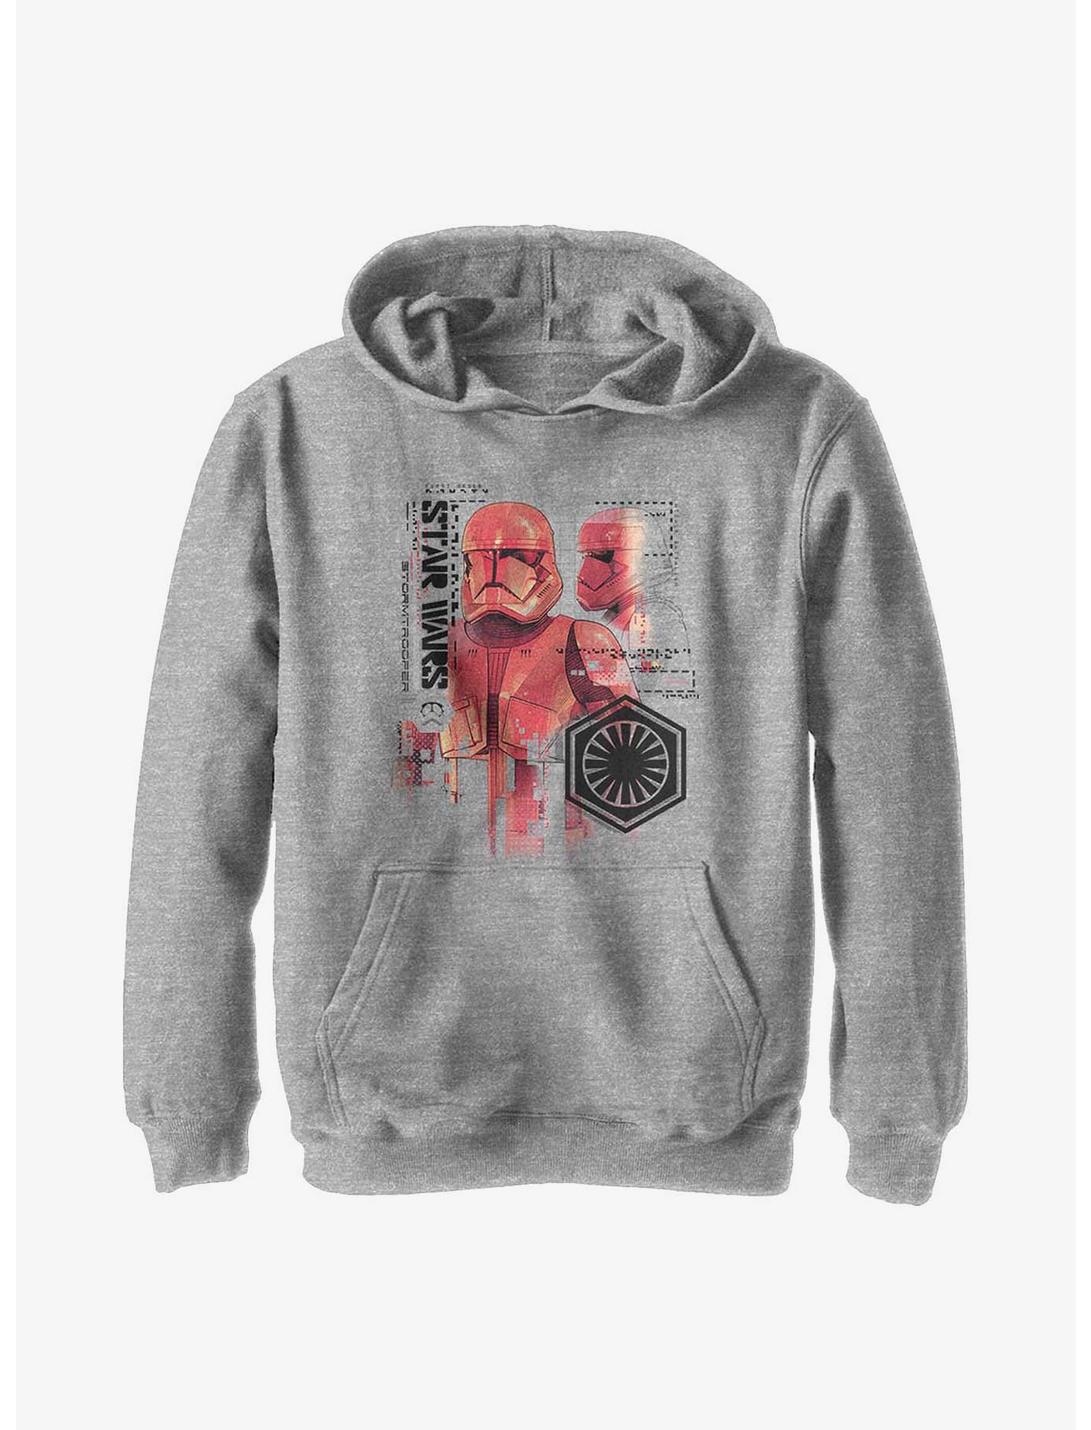 Star Wars Episode IX: The Rise Of Skywalker Red Trooper Schematic Youth Hoodie, ATH HTR, hi-res